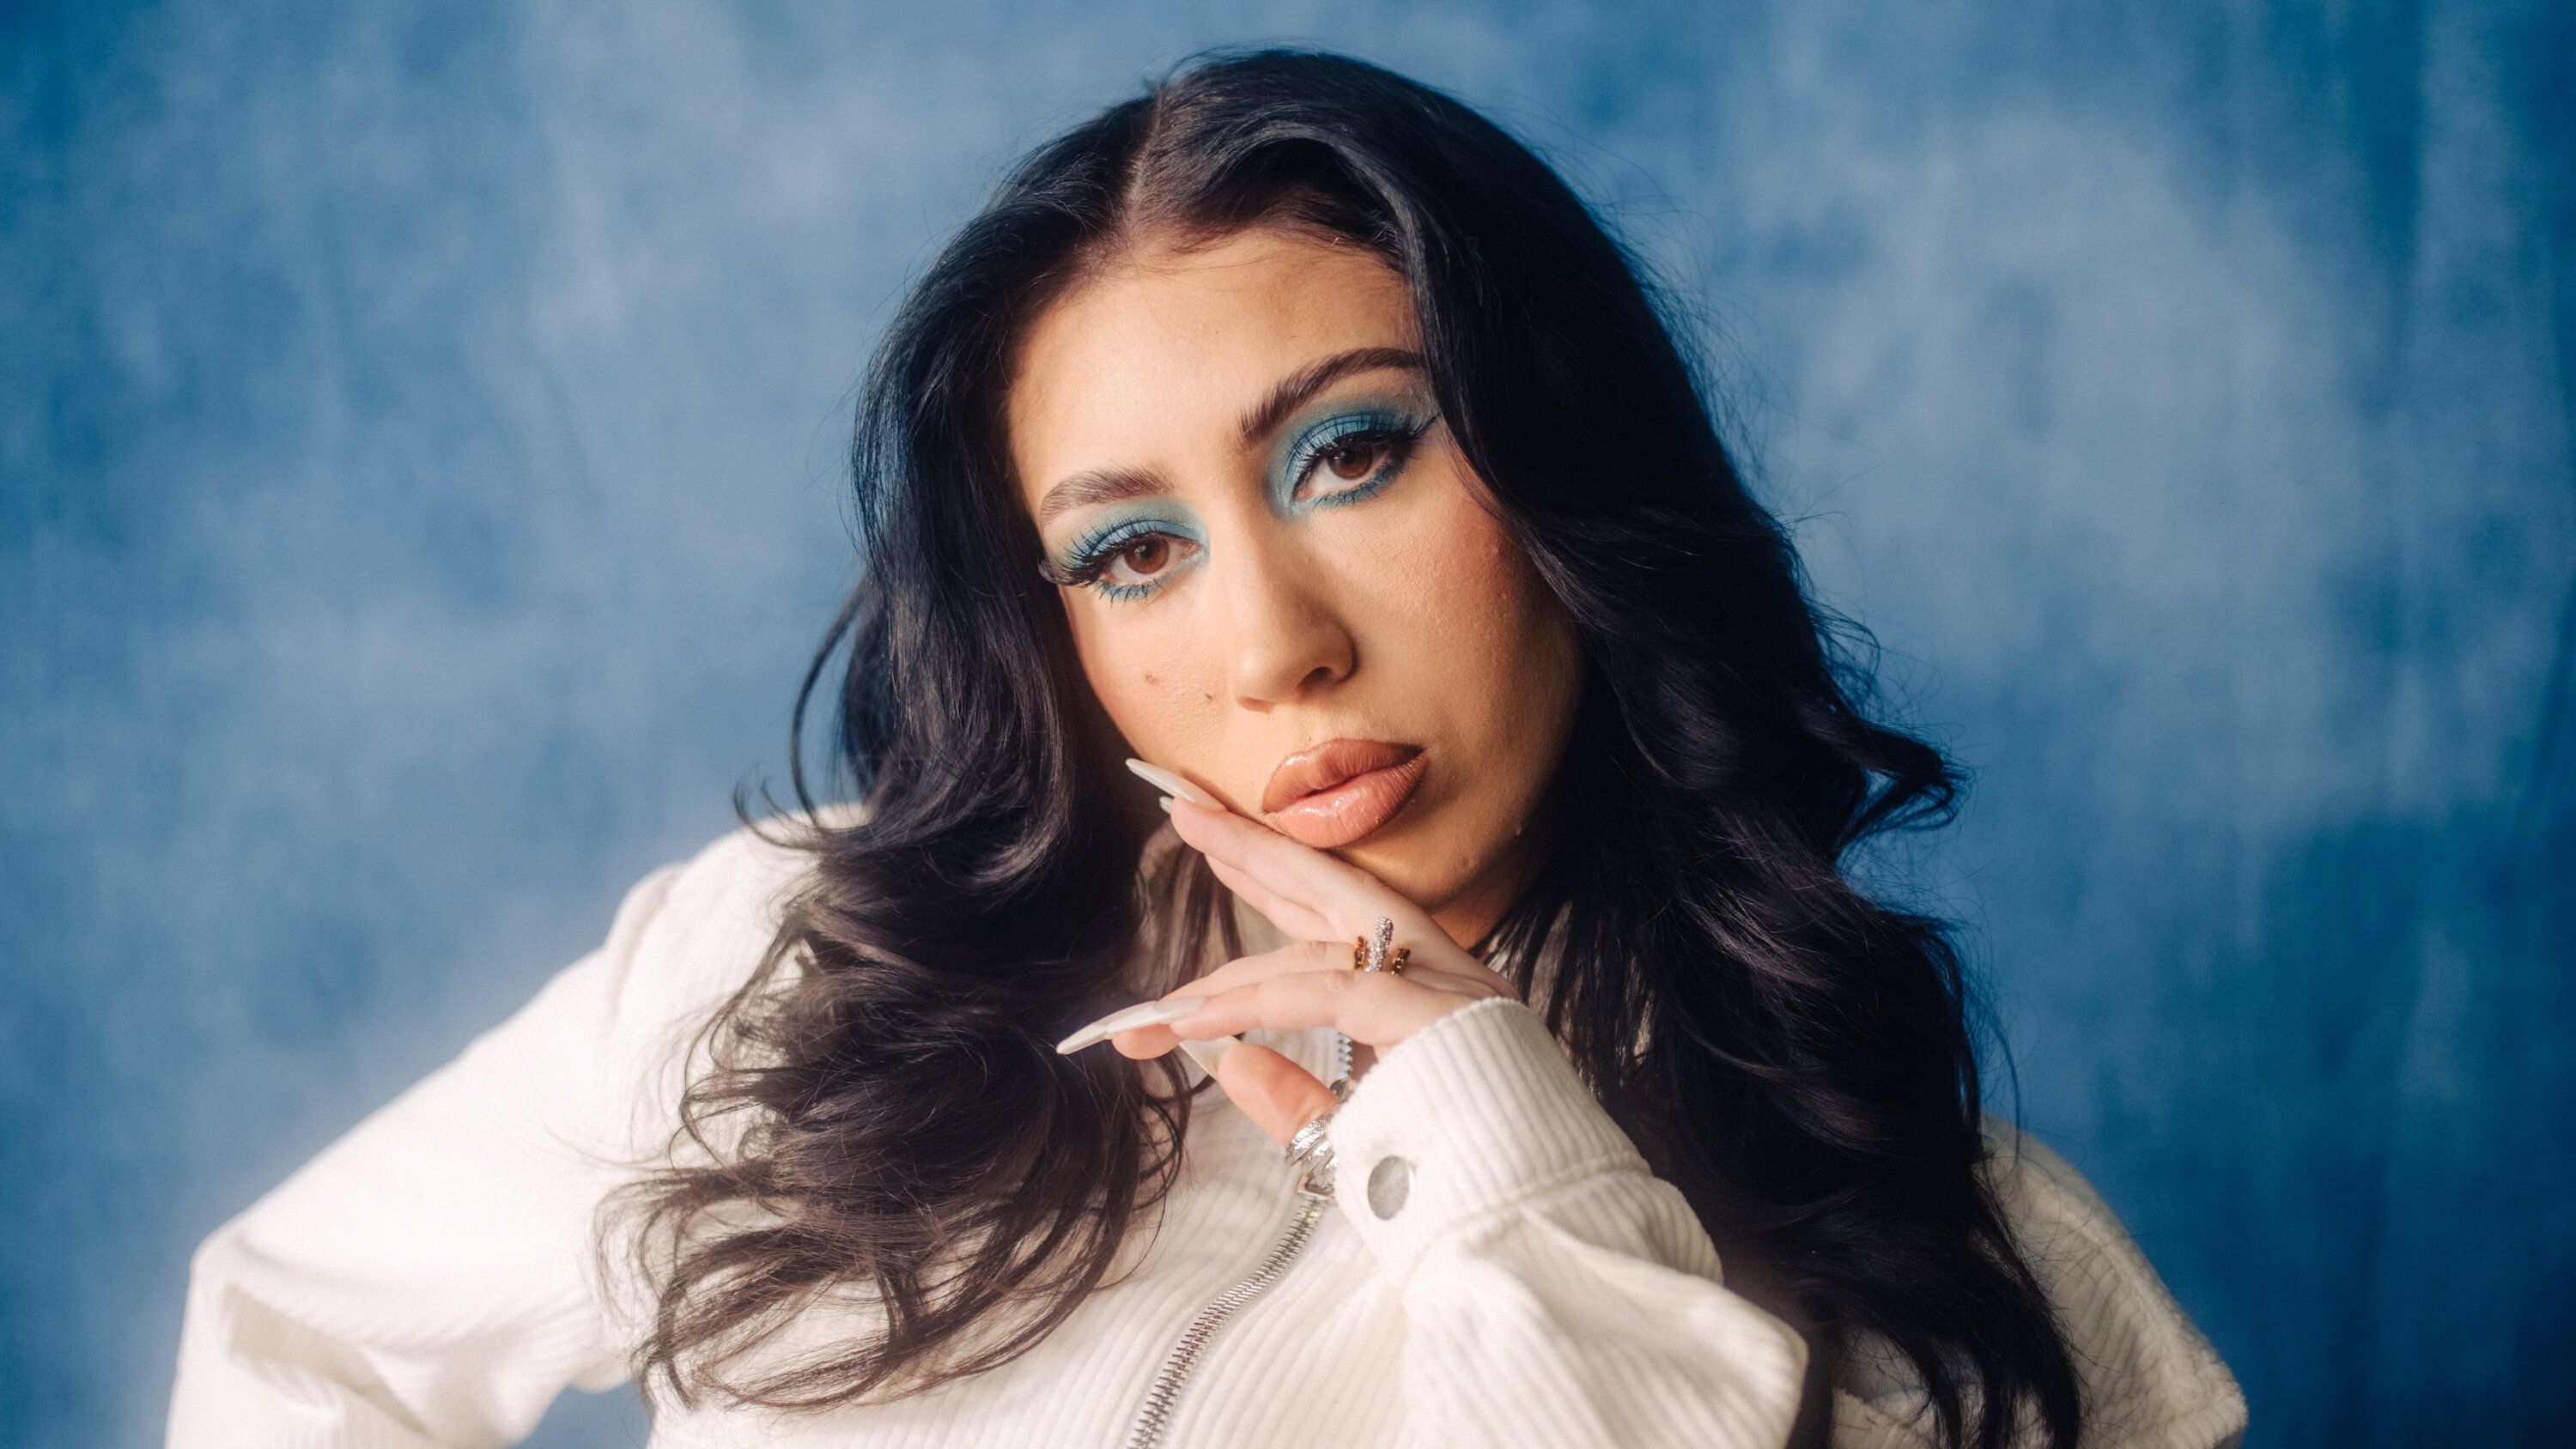 Kali Uchis Is a Complicated Musician. She Plans to Stay That Way